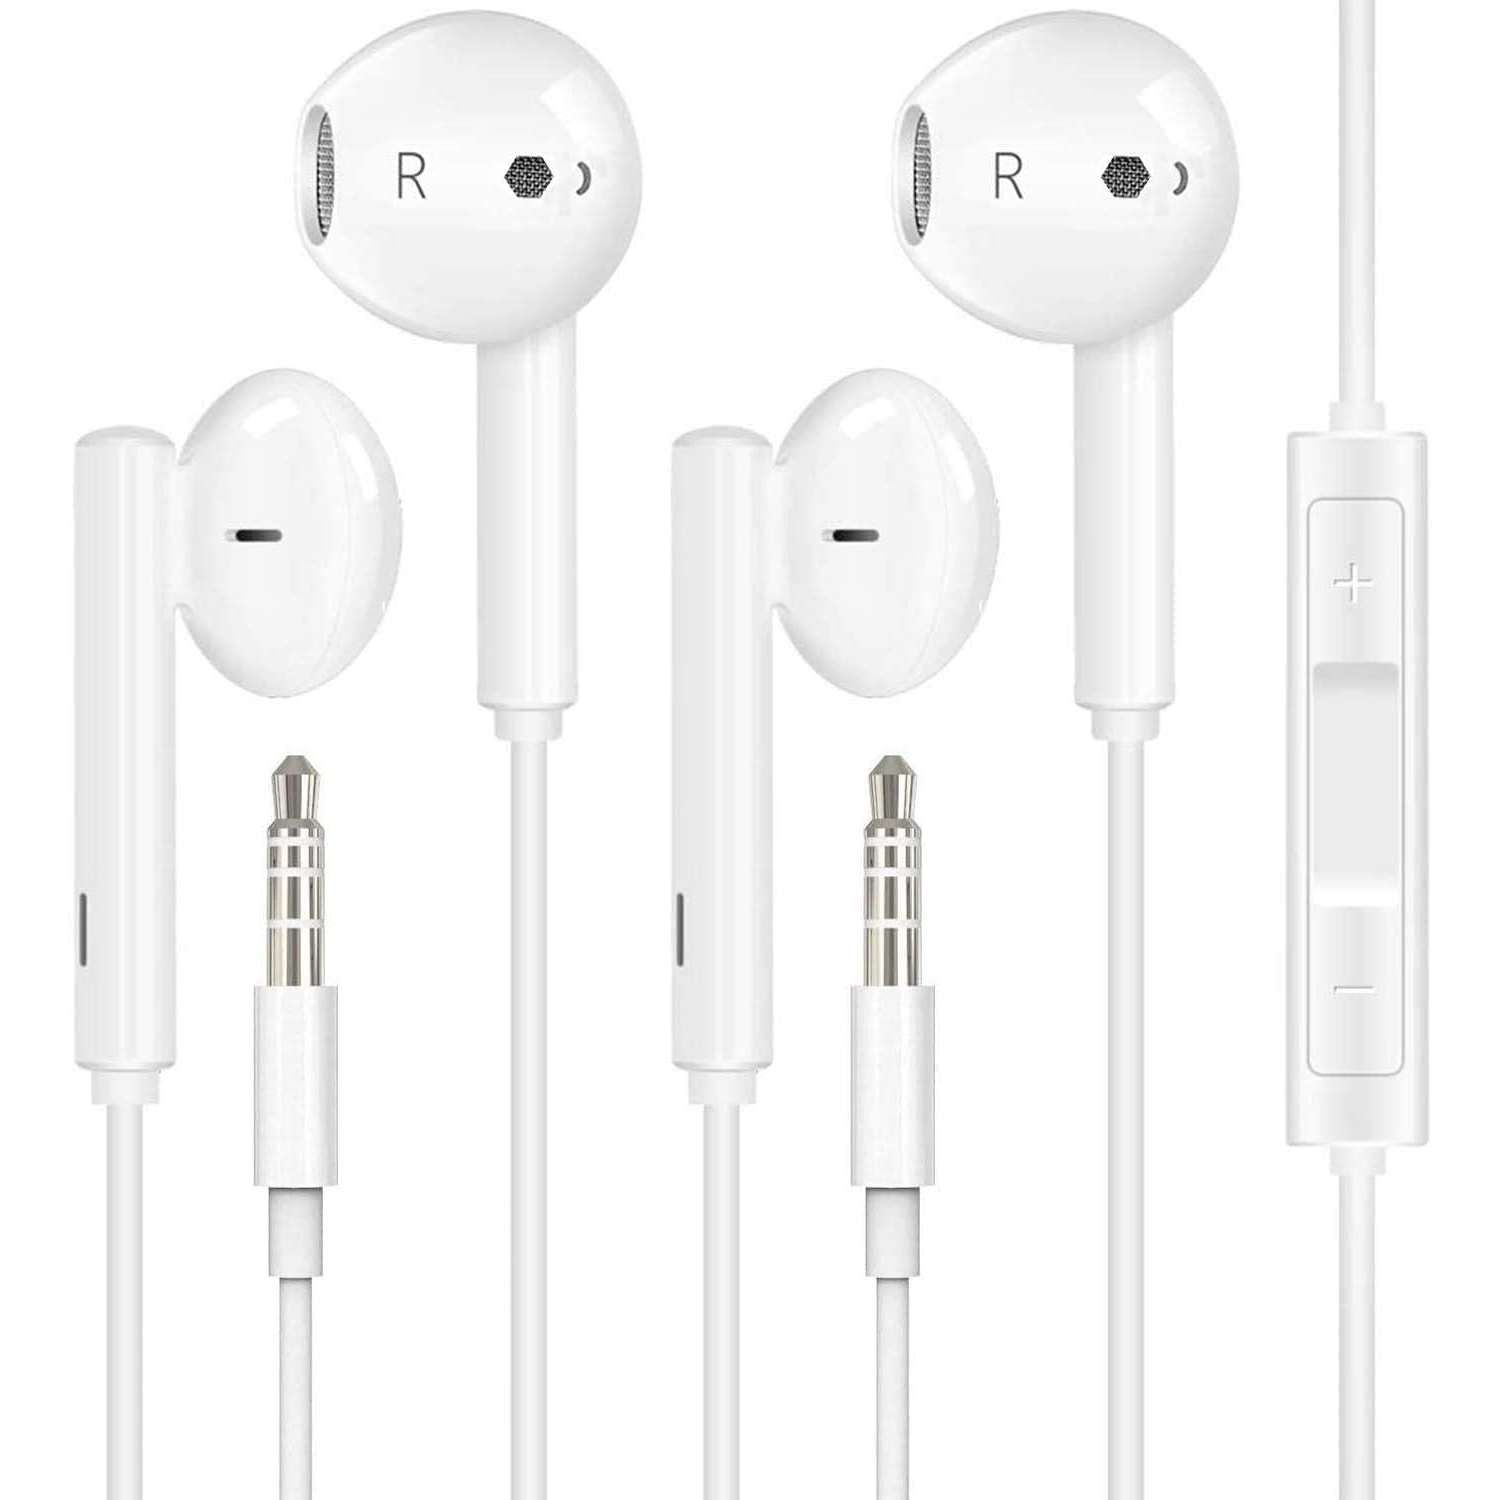 CABLESHARK FOR (2 Pack) Aux Headphones/Earbuds 3.5mm Wired Headphones Noise Isolating with Built-in Microphone & Volume Control Compatible with Apple iPhone 6 SE 5S 4 iPod iPad Samsung/Android MP3